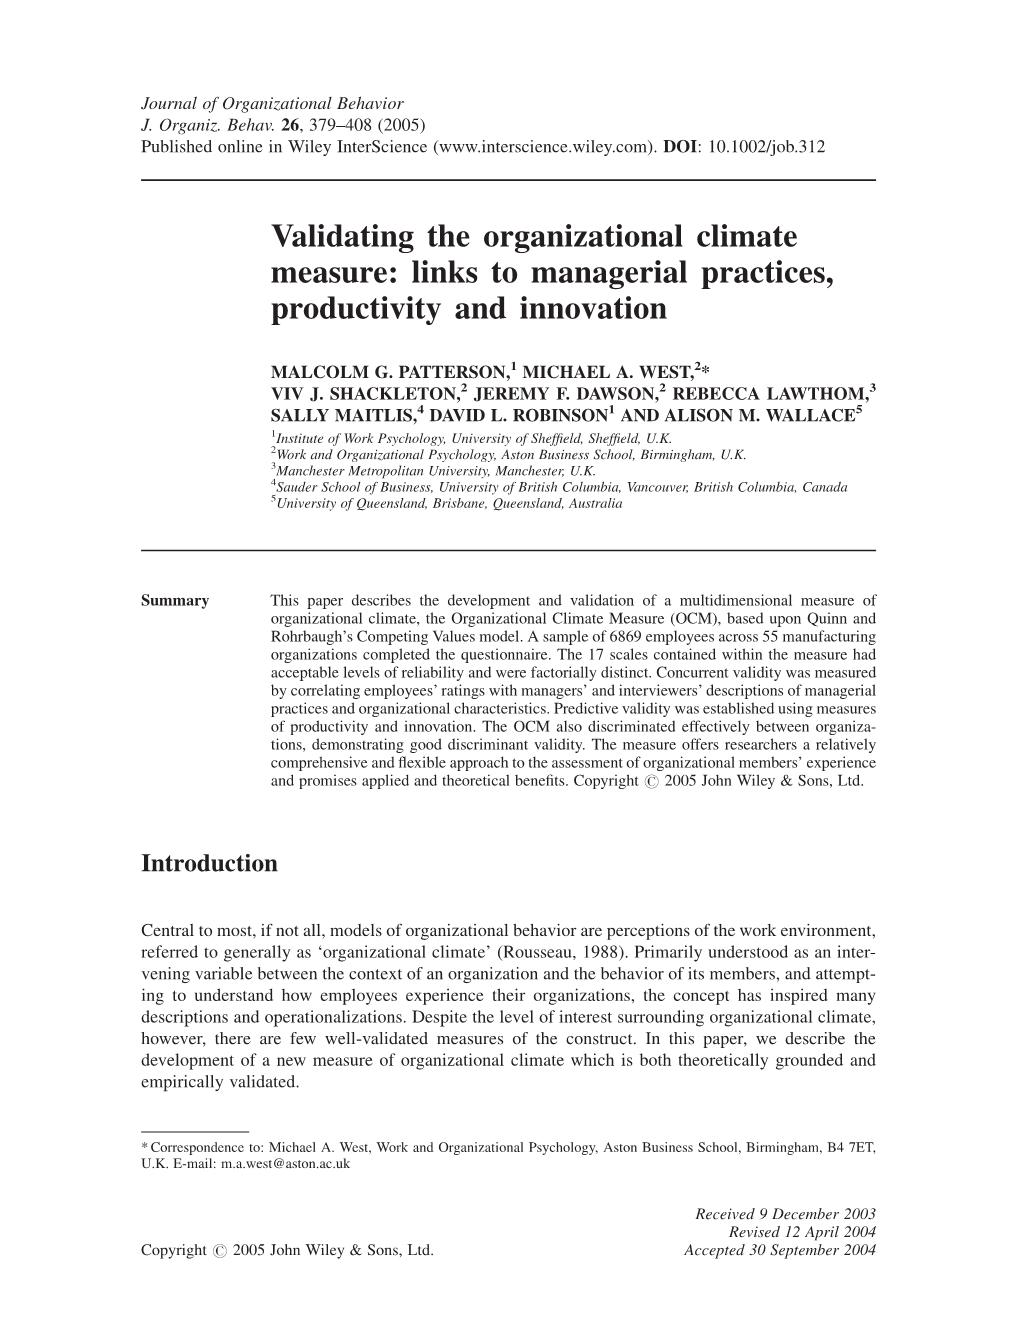 Validating the Organizational Climate Measure: Links to Managerial Practices, Productivity and Innovation